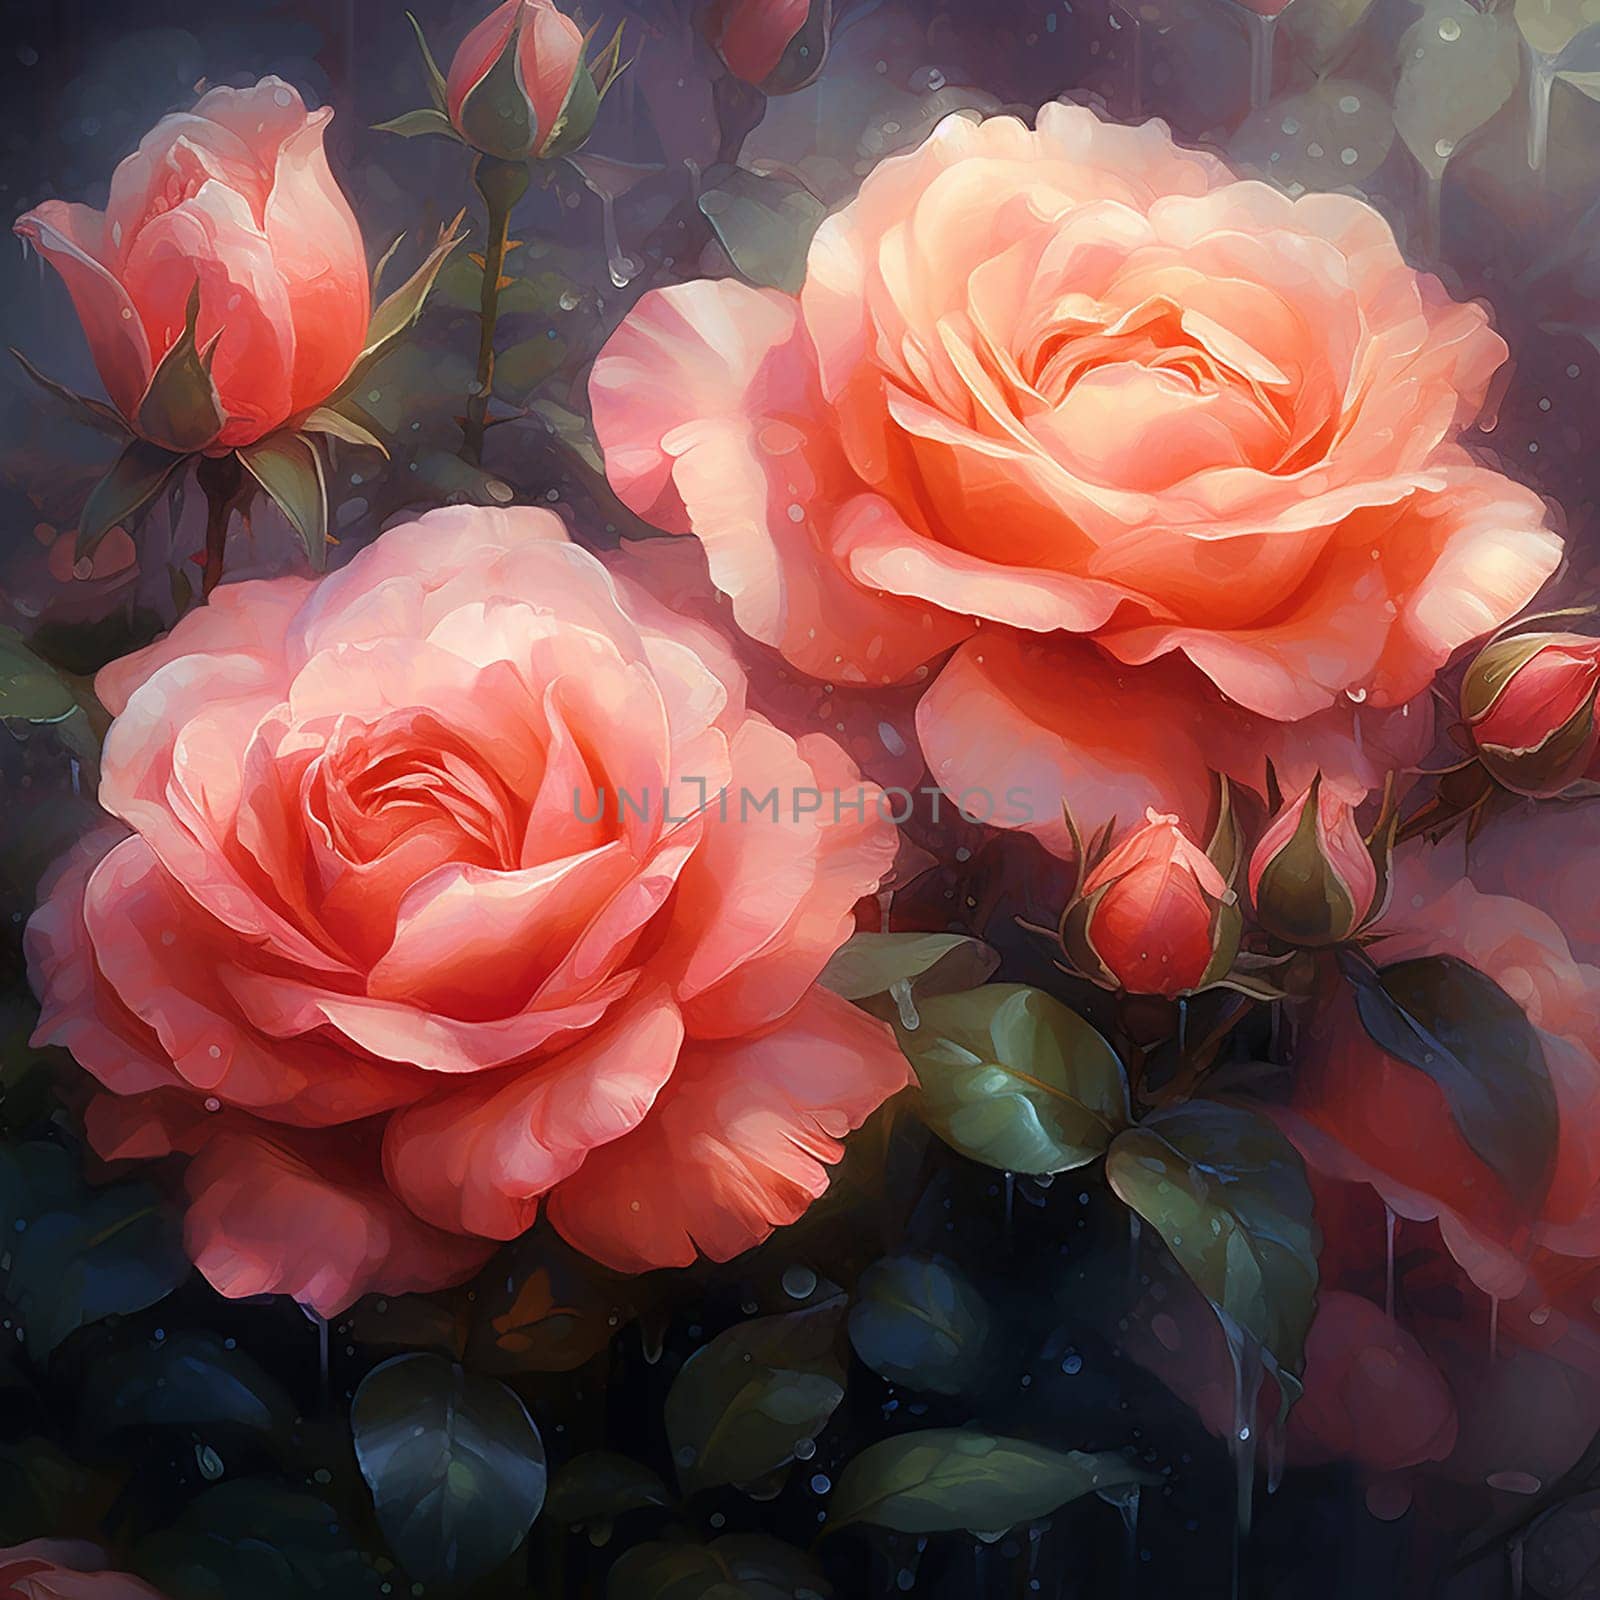 Vibrant pink roses in bloom with water droplets on petals and leaves. by Hype2art